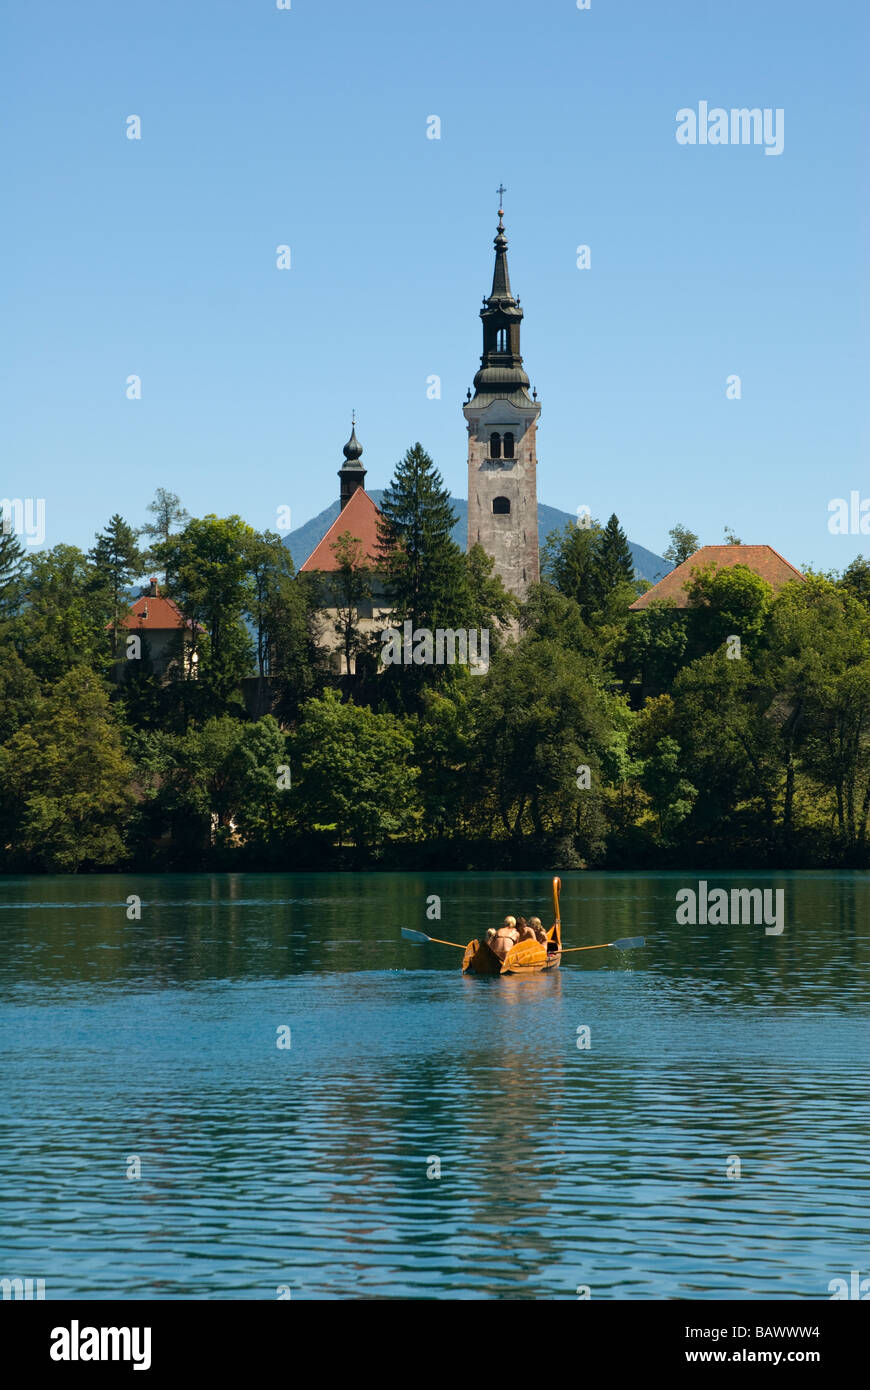 Church of the Assumption on Bled Island Stock Photo